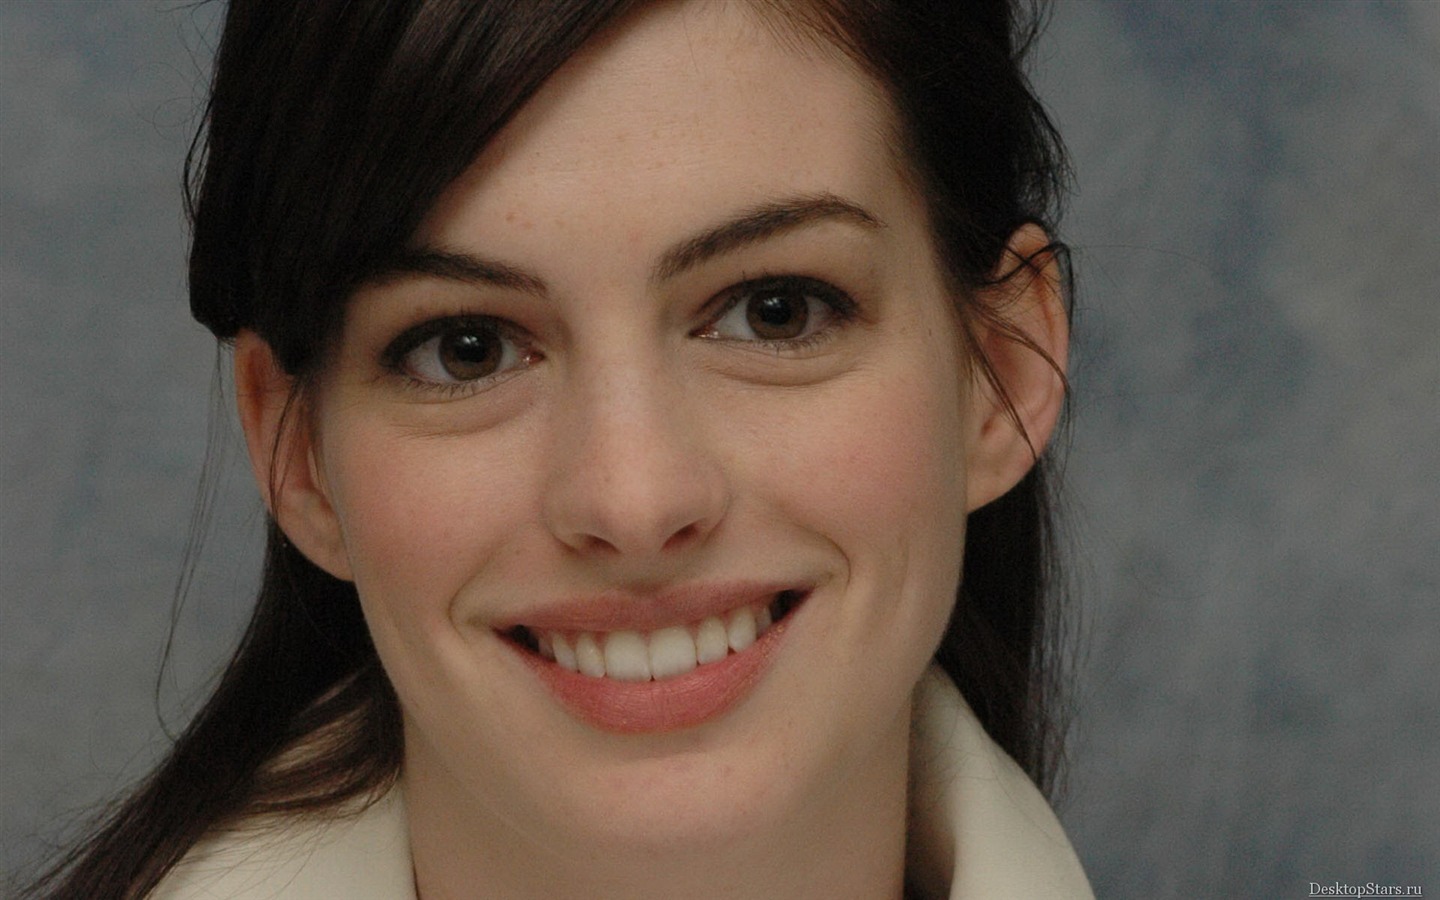 Anne Hathaway #002 - 1440x900 Wallpapers Pictures Photos Images